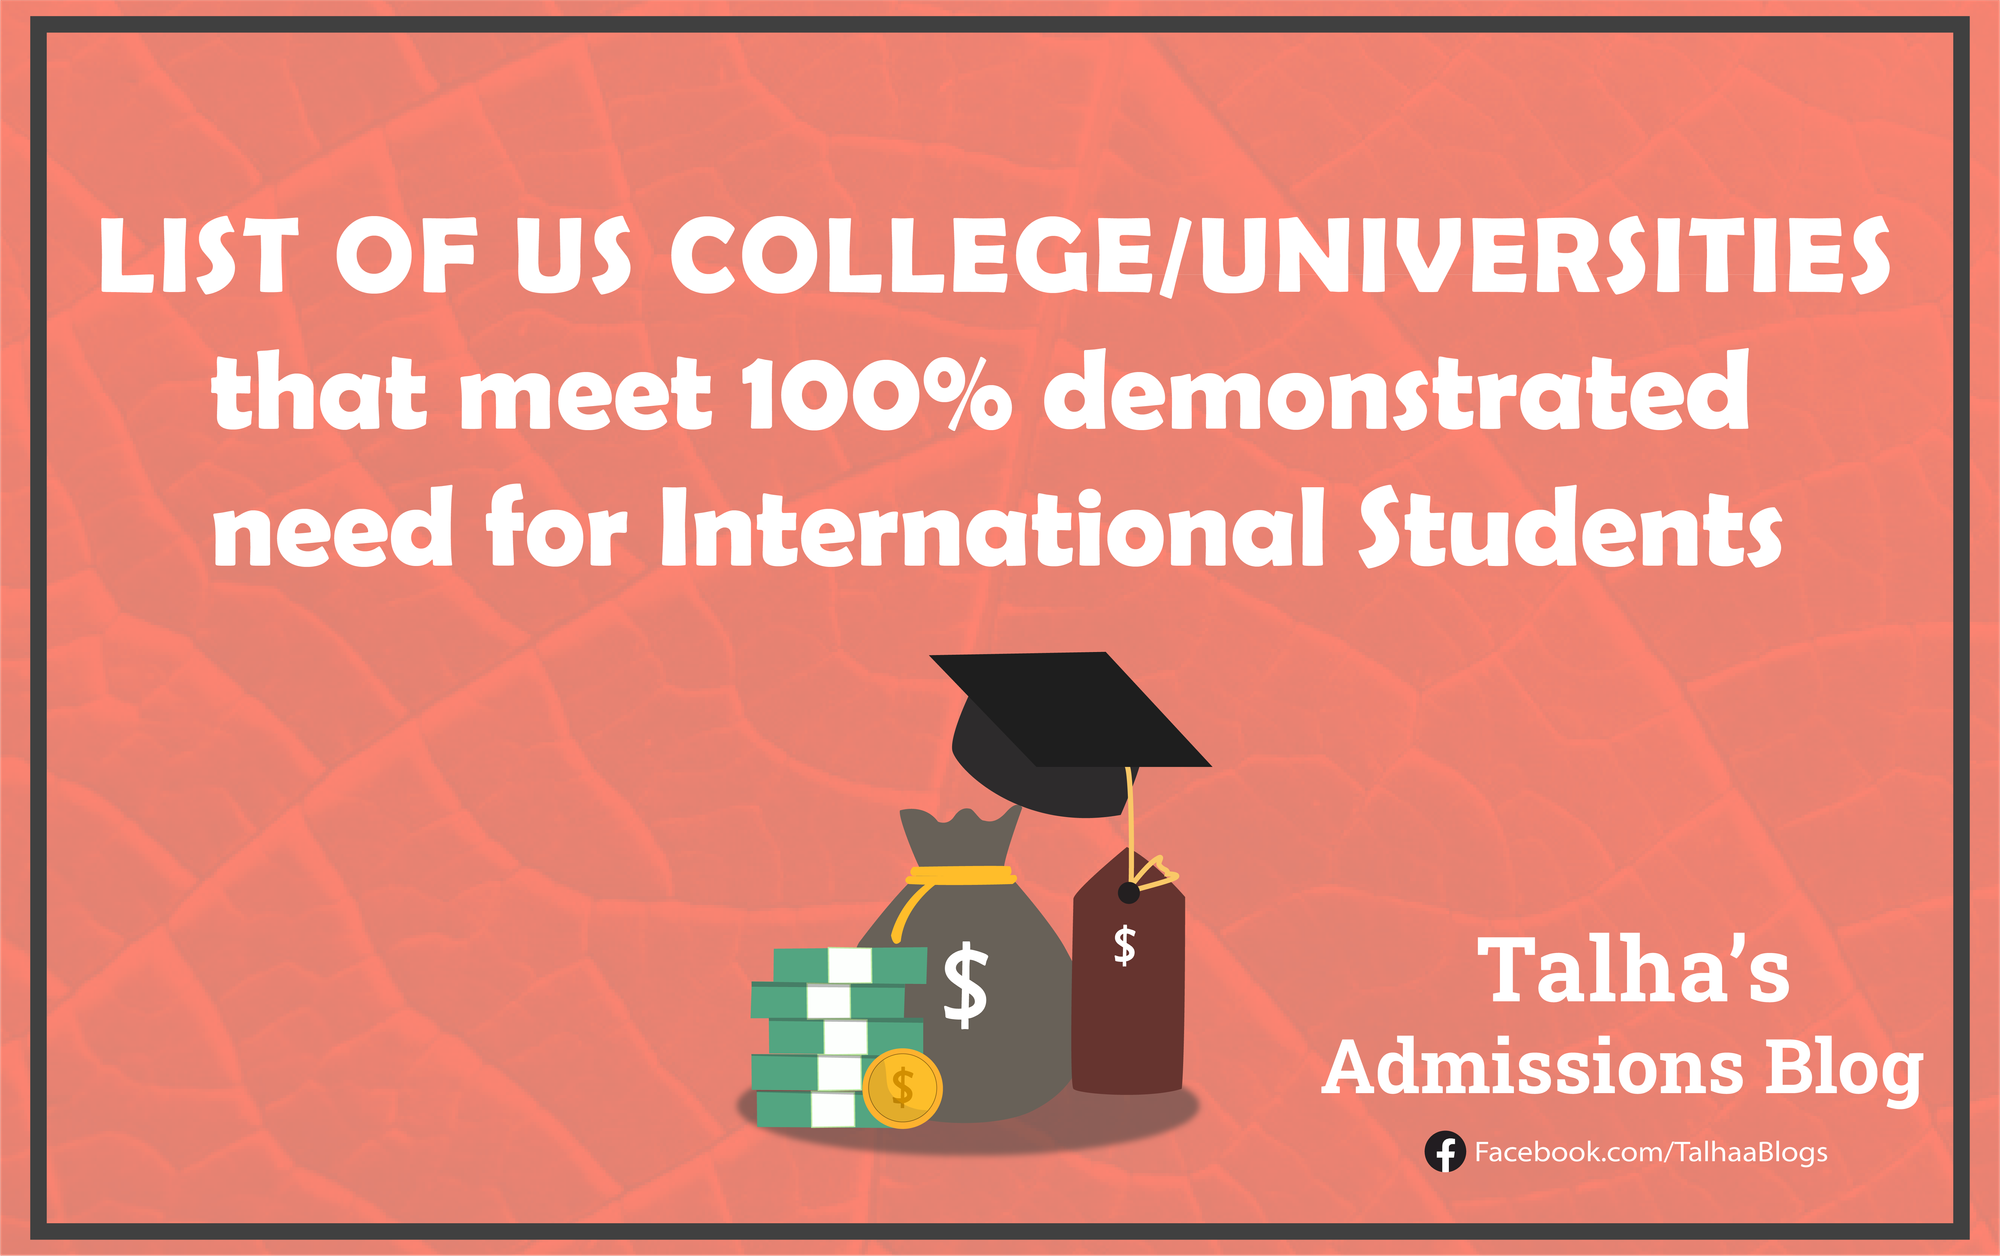 List of US colleges/universities that meet 100% demonstrated need for International Students